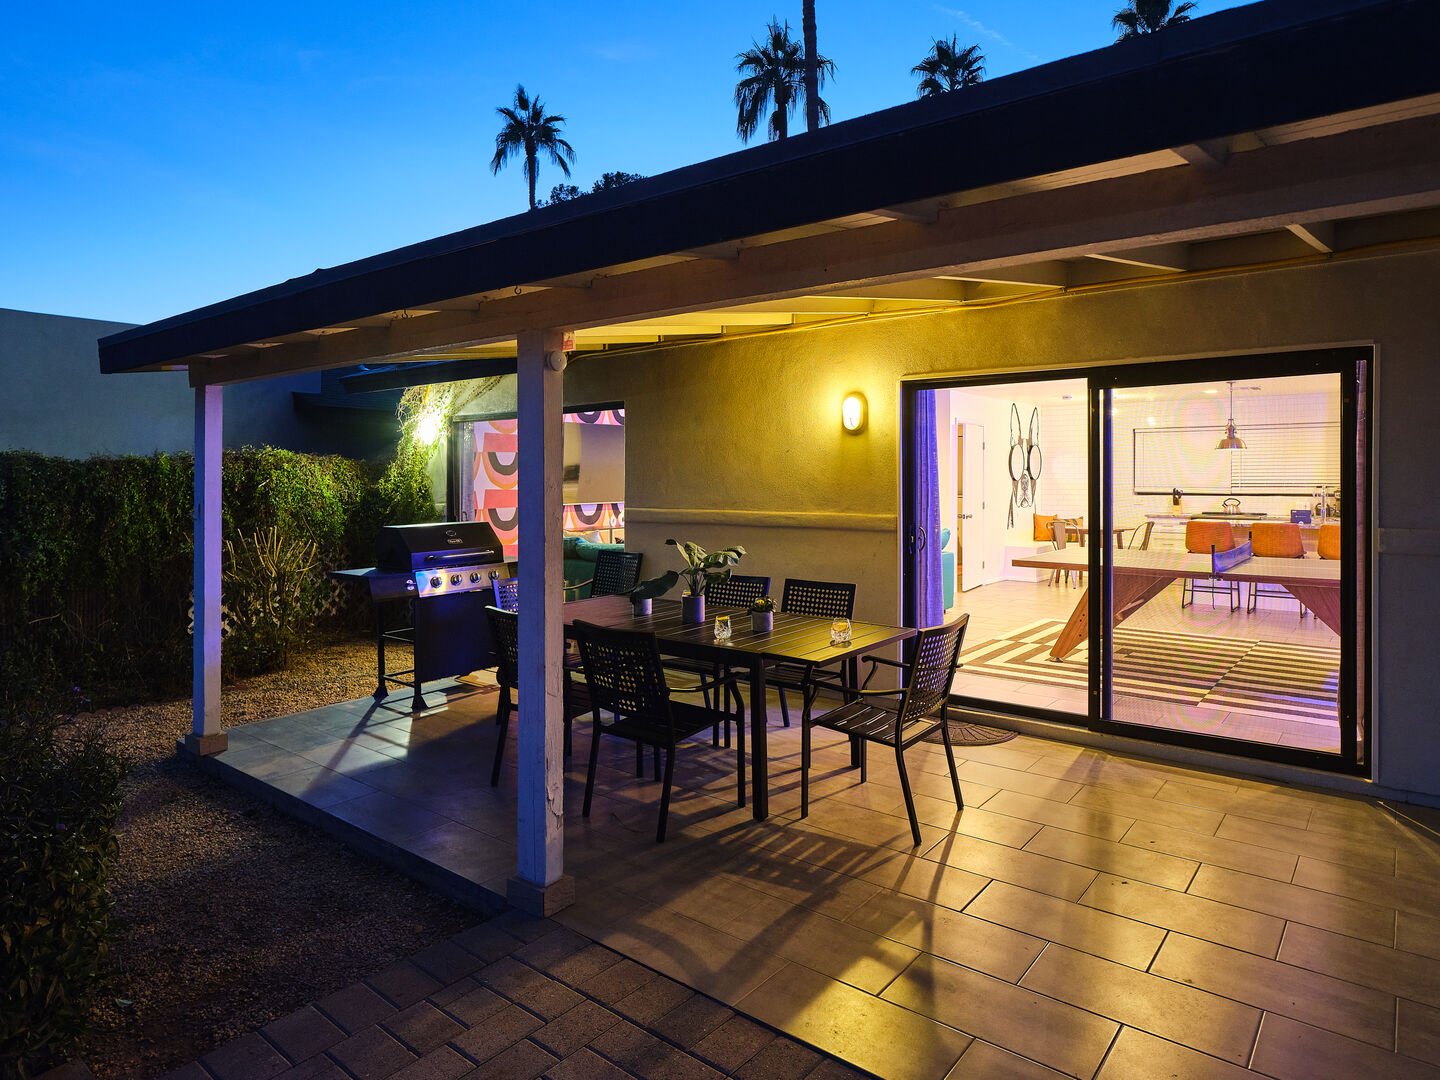 Covered outdoor patio with outdoor dining and BBQ grill.